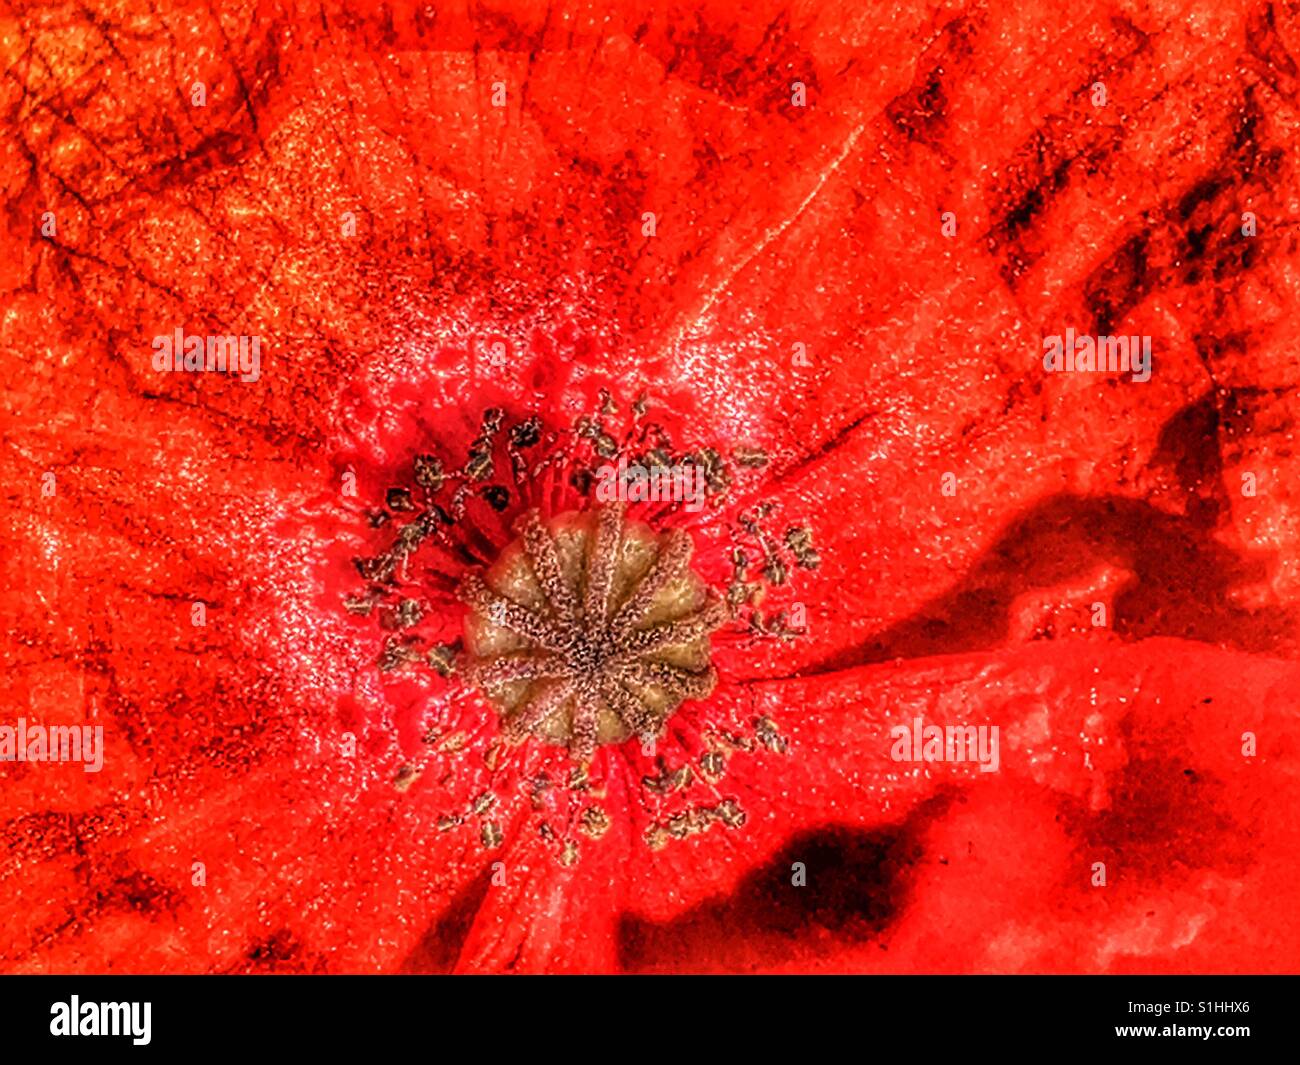 Papaver rhoeas, also known as common poppy, red poppy or Flanders poppy Stock Photo